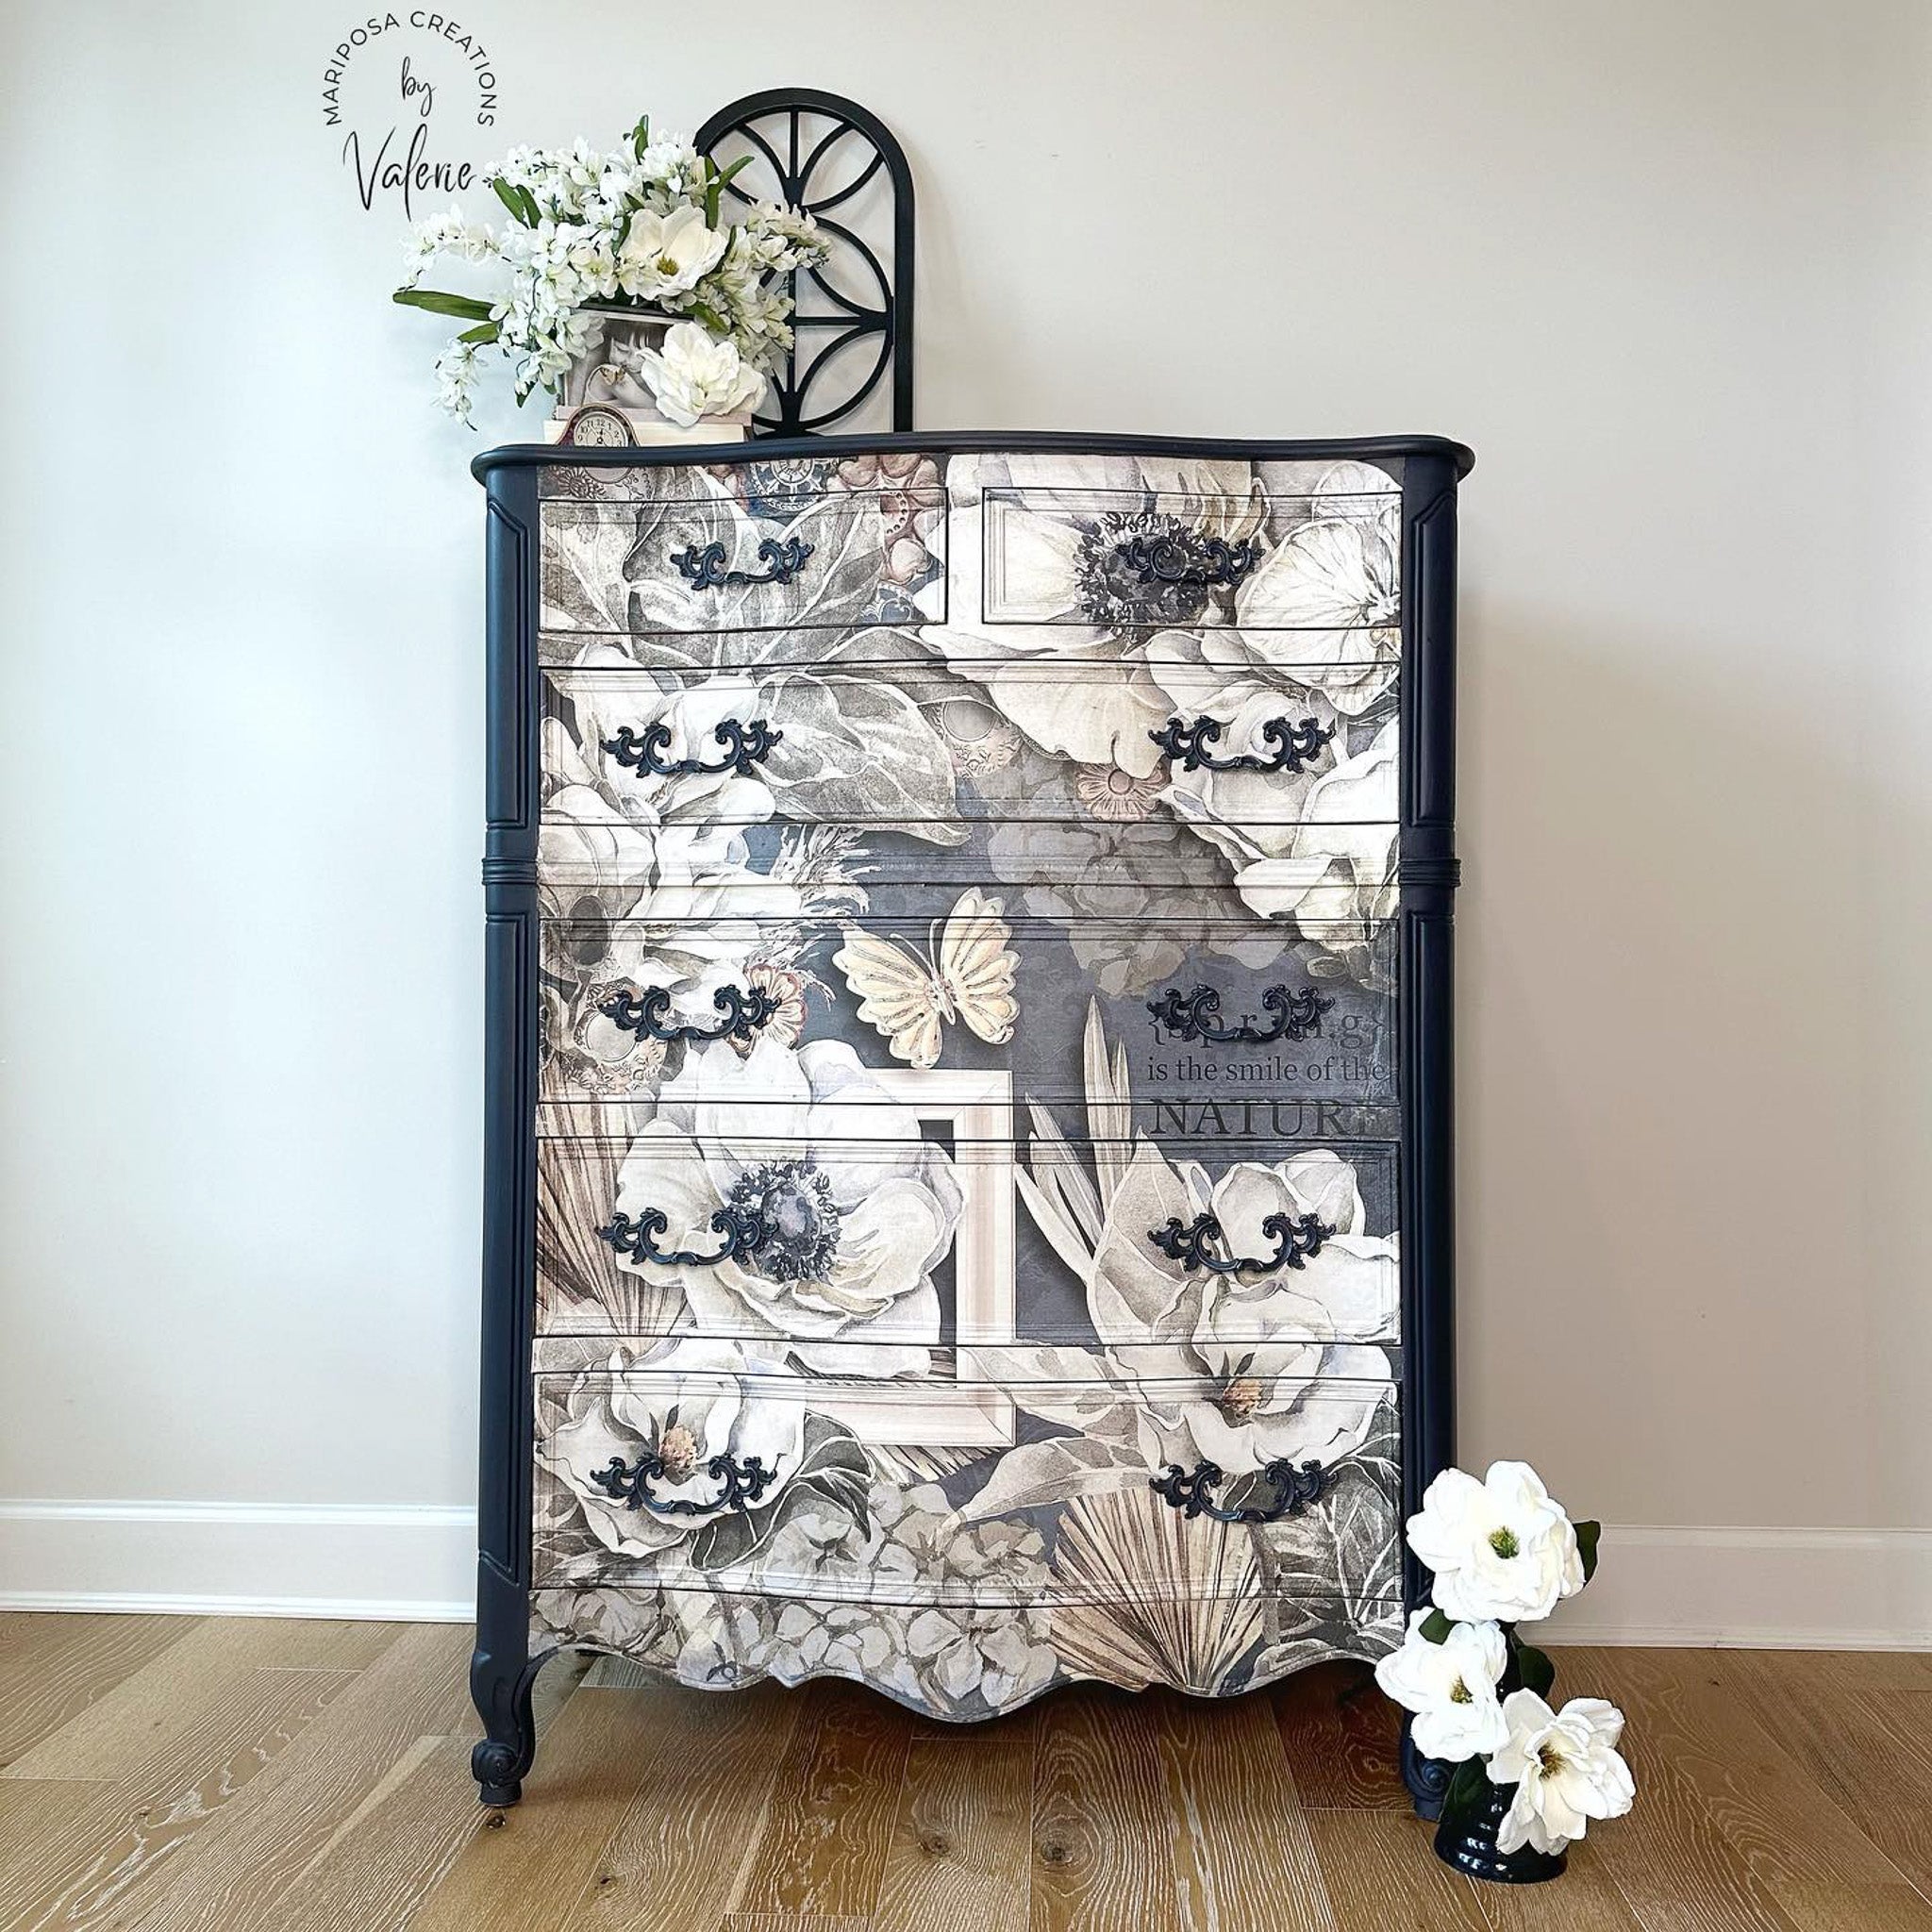 A vintage chest dresser refurbished by Mariposa Creations by Valerie is painted navy blue and features Decoupage Queen's Sugar Magnolia A1 rice paper on the whole front side.